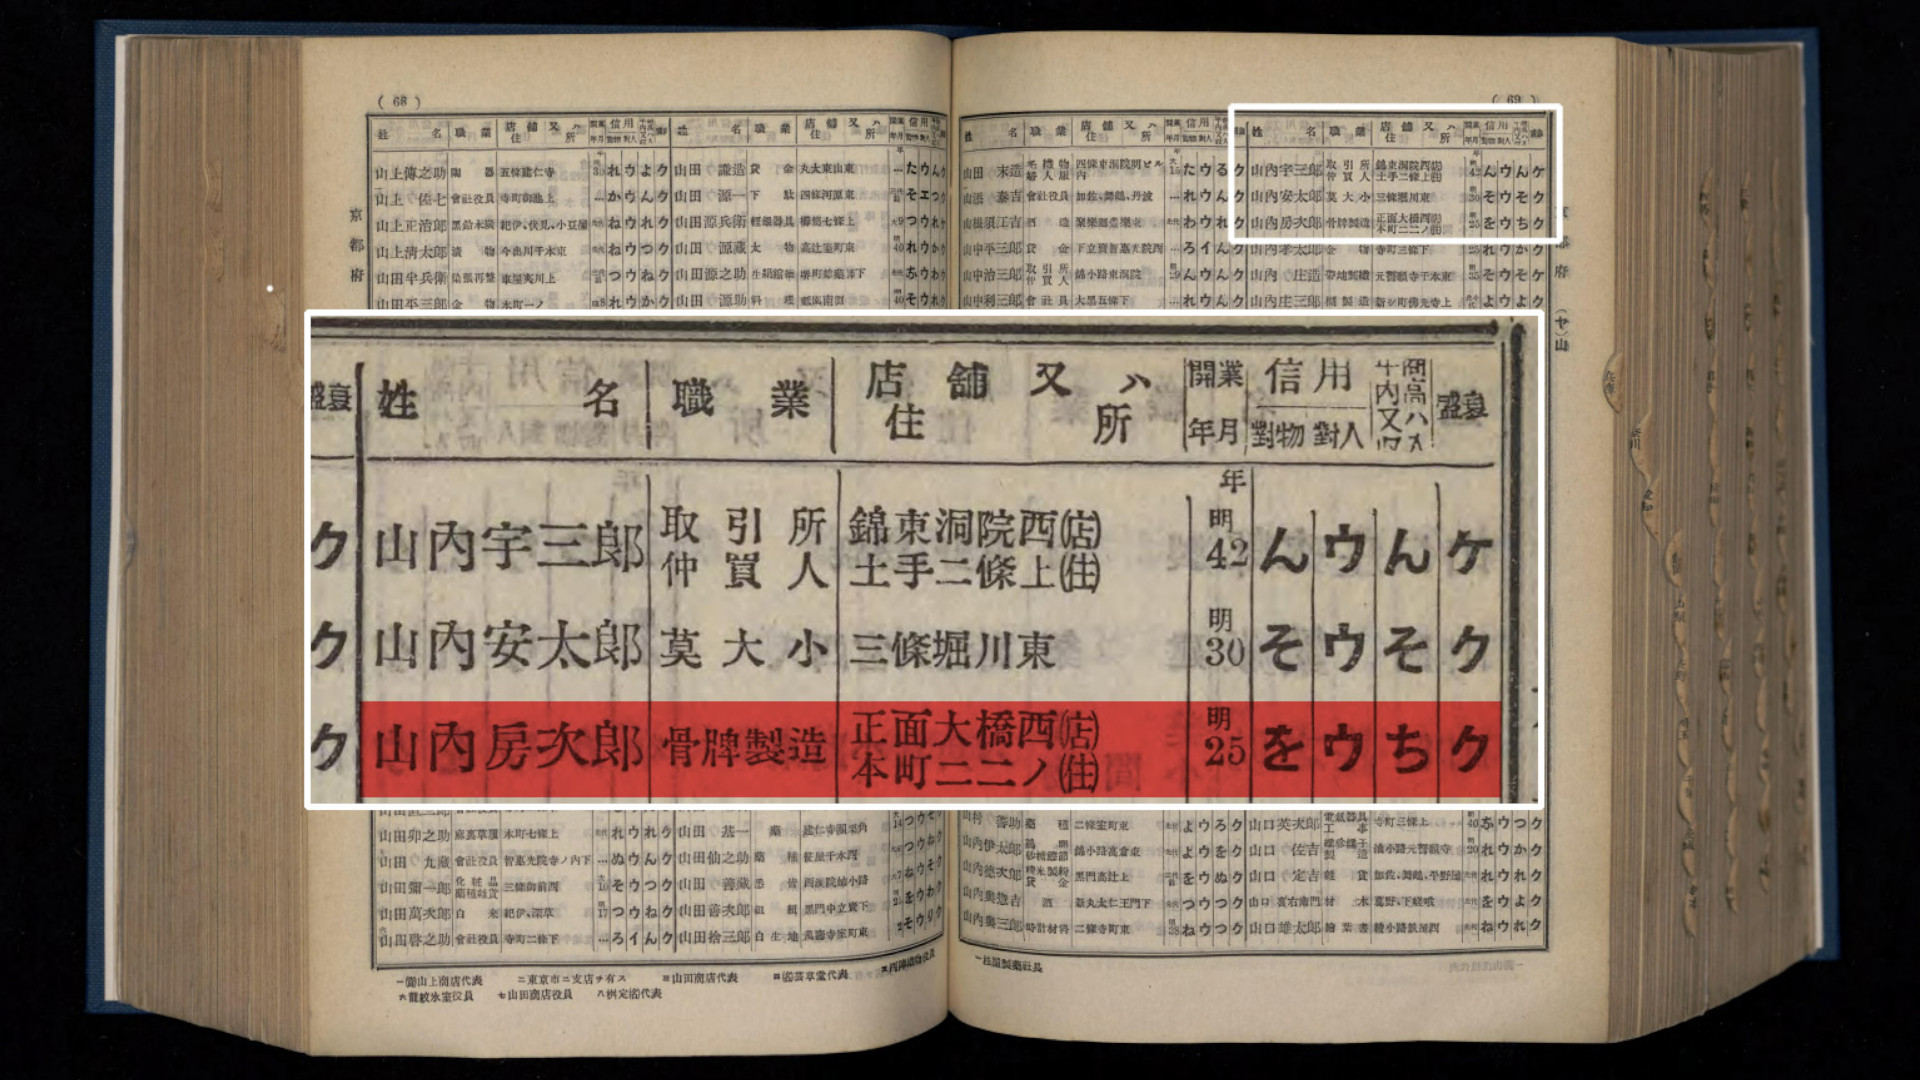 1928 listing of Fusajiro Yamauchi as a playing card manufacturer, highlighted in red. The founding date of his business is listed as 1892.